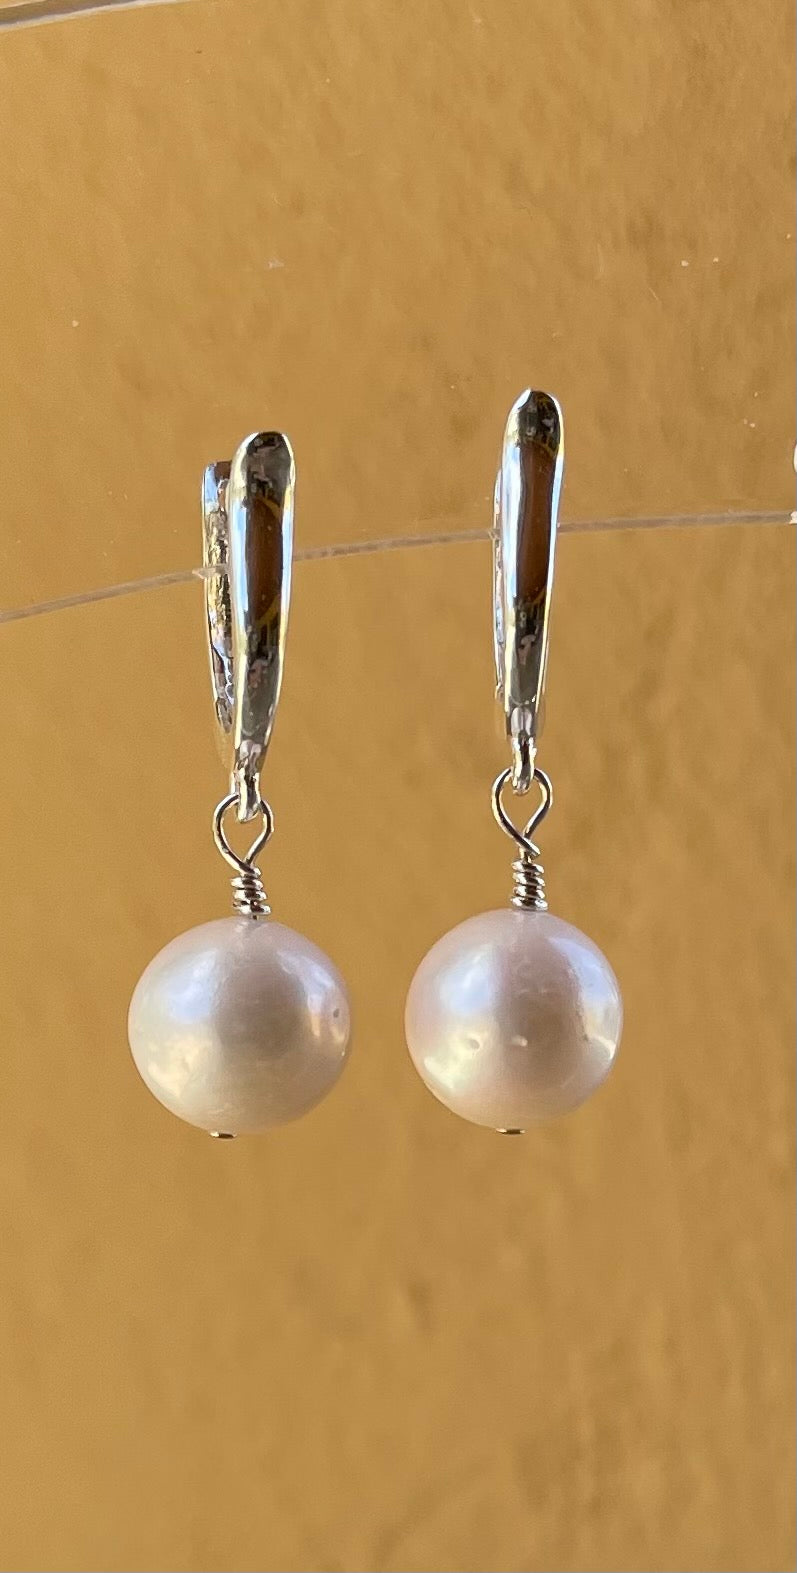 Earrings - Sterling silver with larger white round pearls